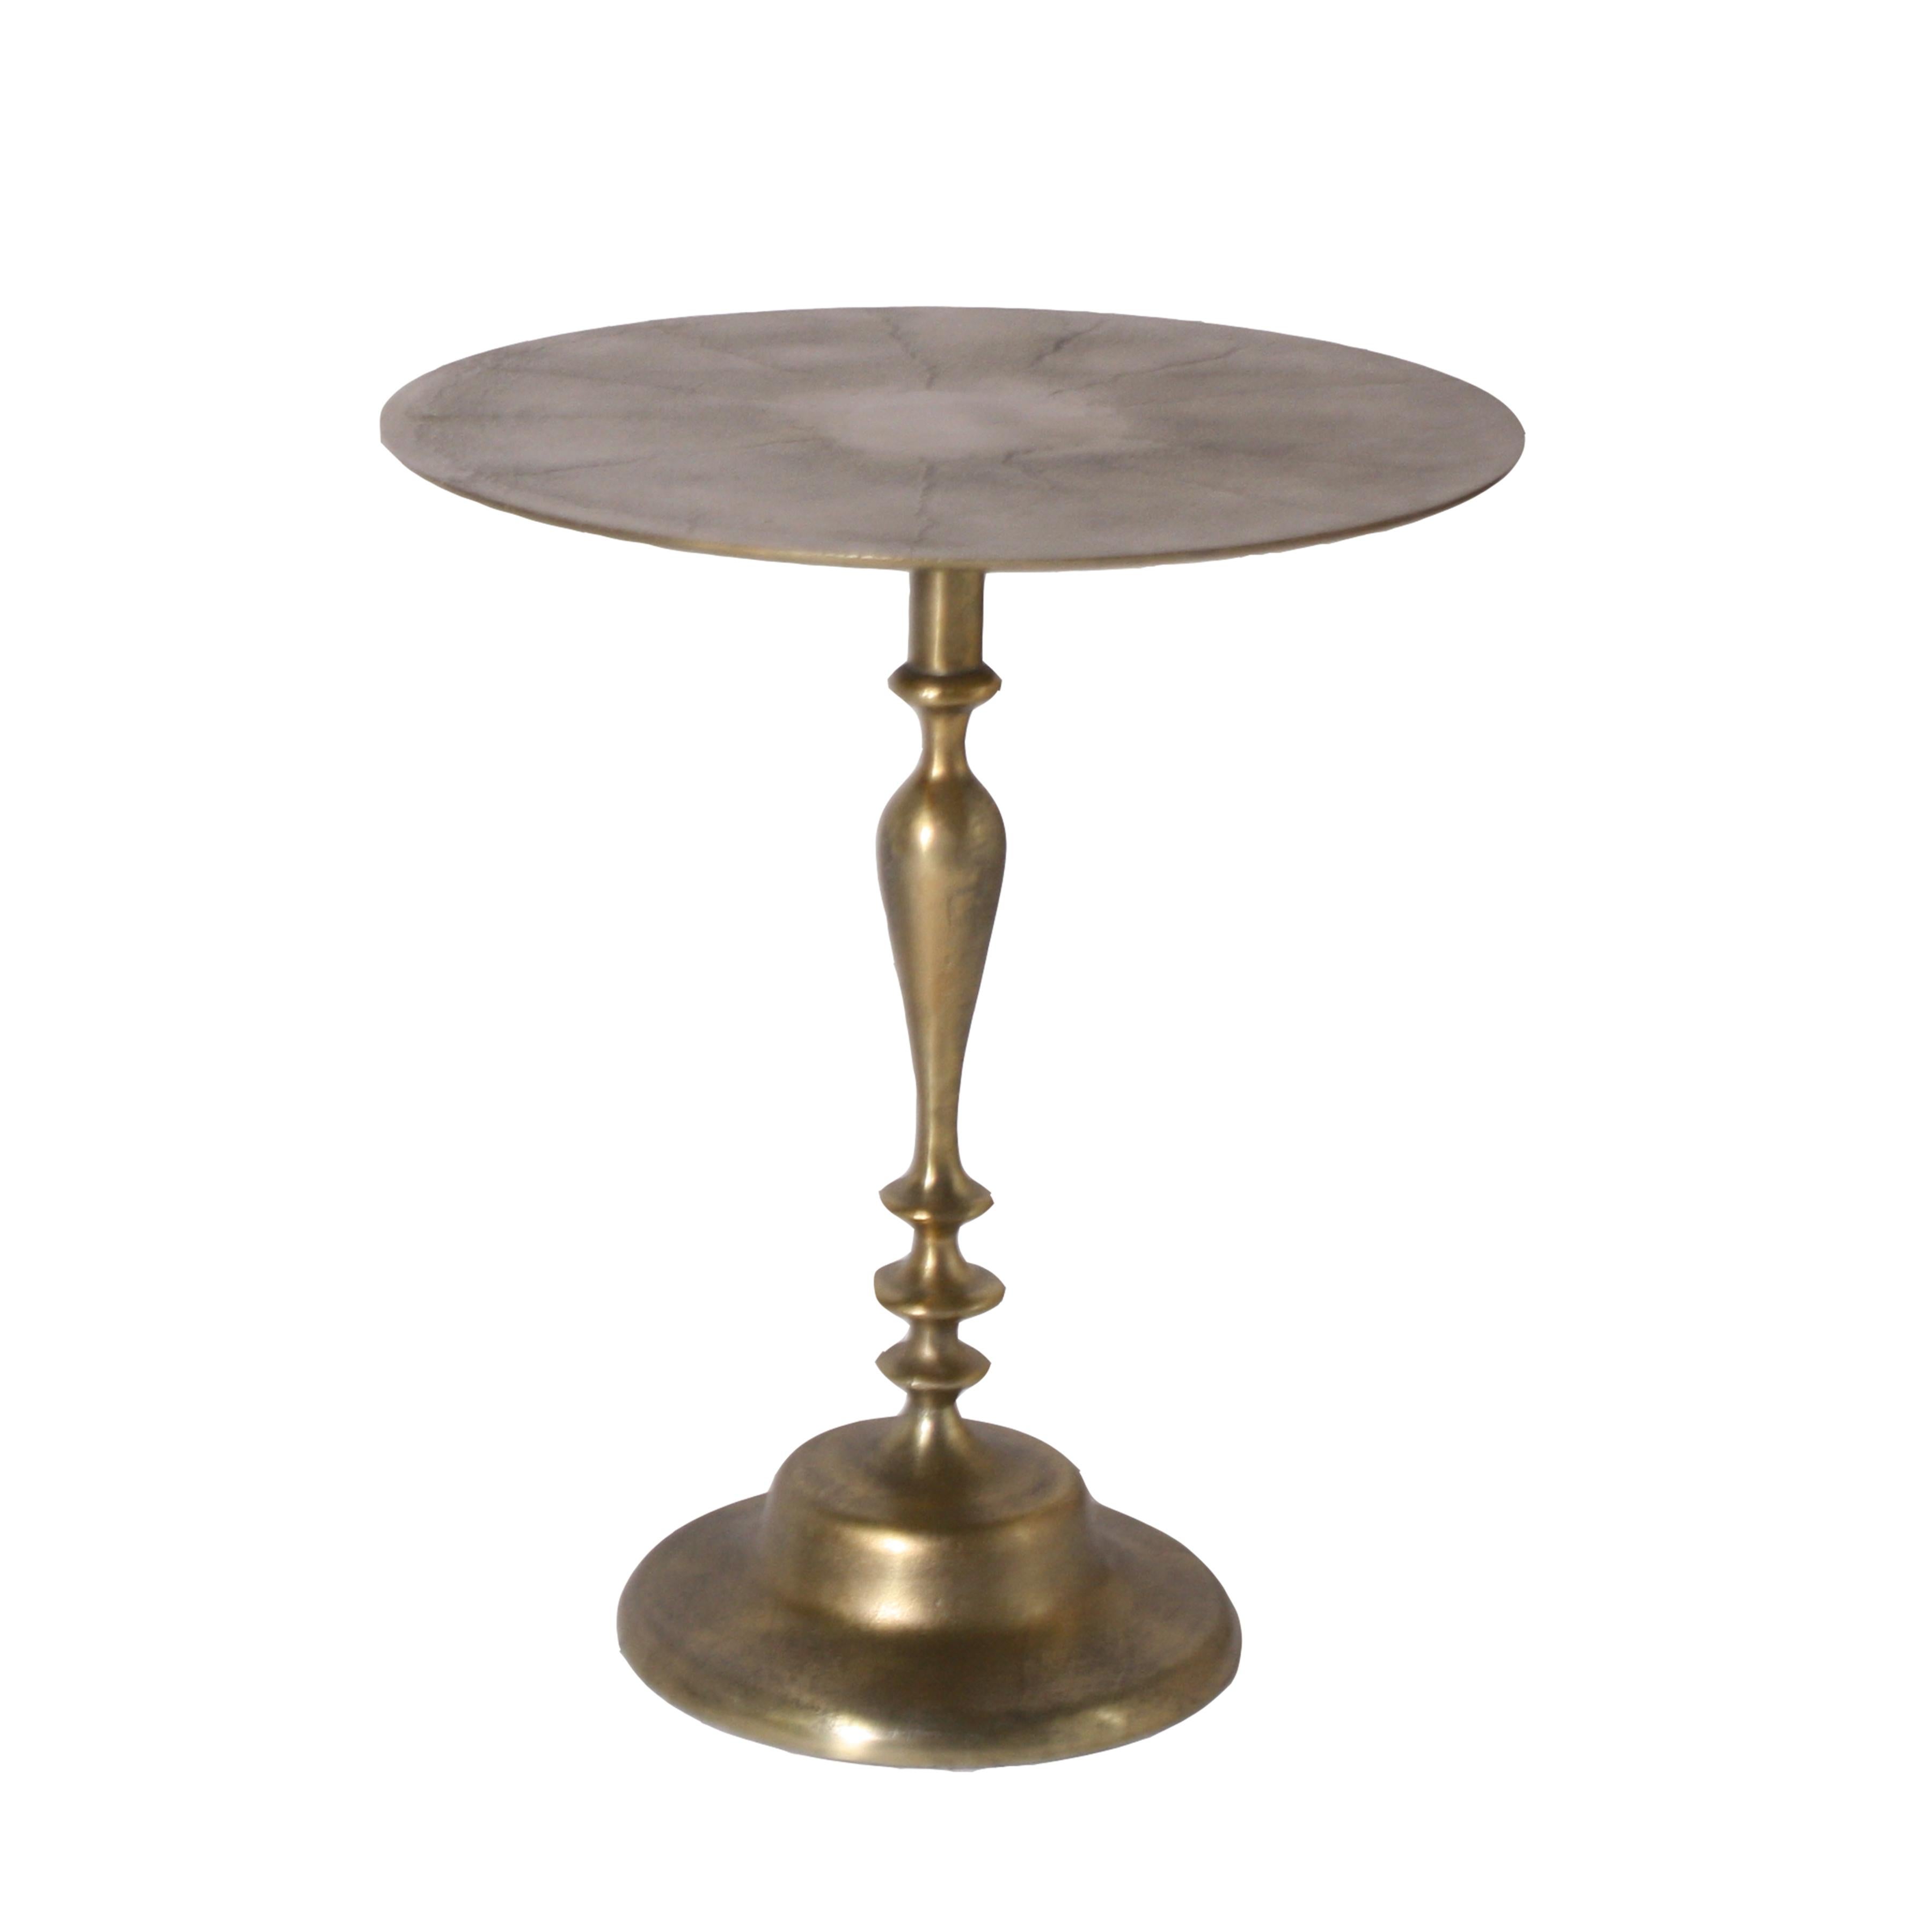 Pair of small Alberto Pinto brass tables designed for the Ritz, circa 1950.